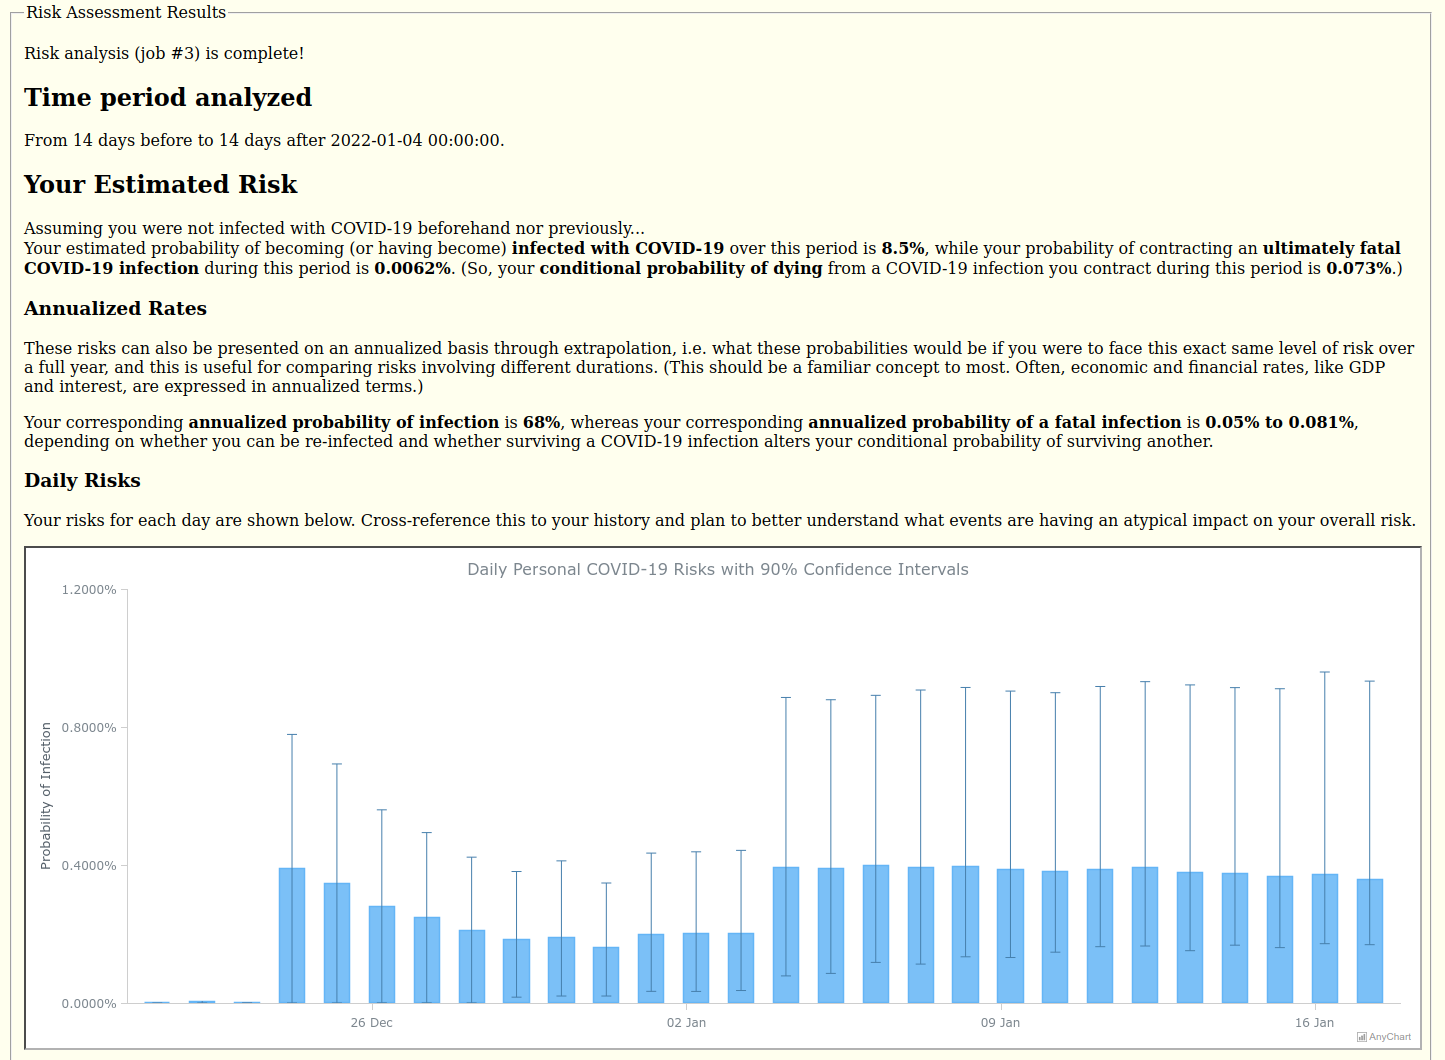 COVID-19 risk assessment results visualized in error charts in Pandemonium